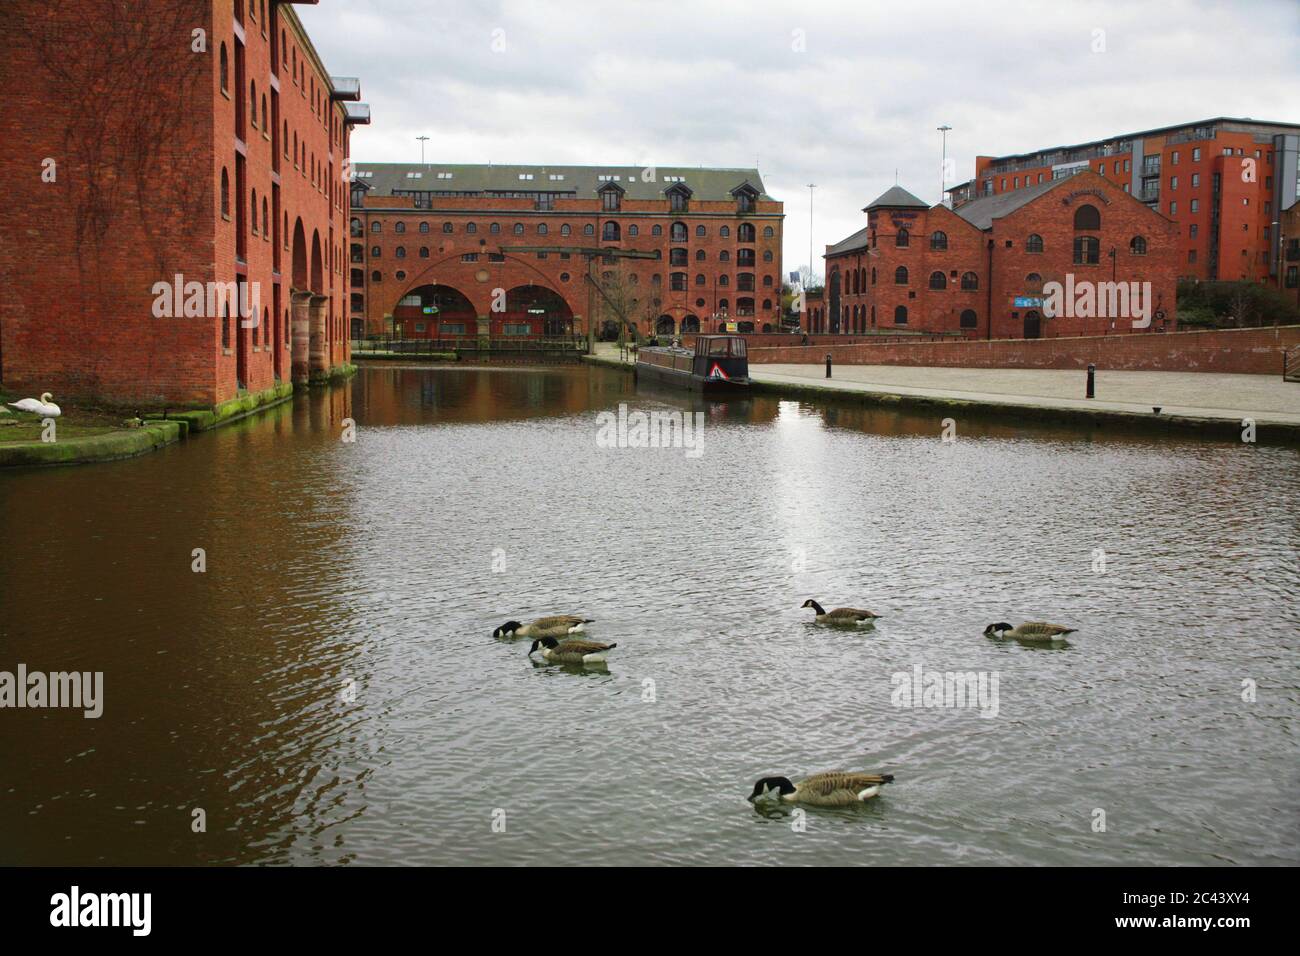 Canada geese and warehouses (Middle Warehouse and Merchants' Warehouse to the left), Bridgewater Canal basin, Castlefield, Manchester, England, UK Stock Photo